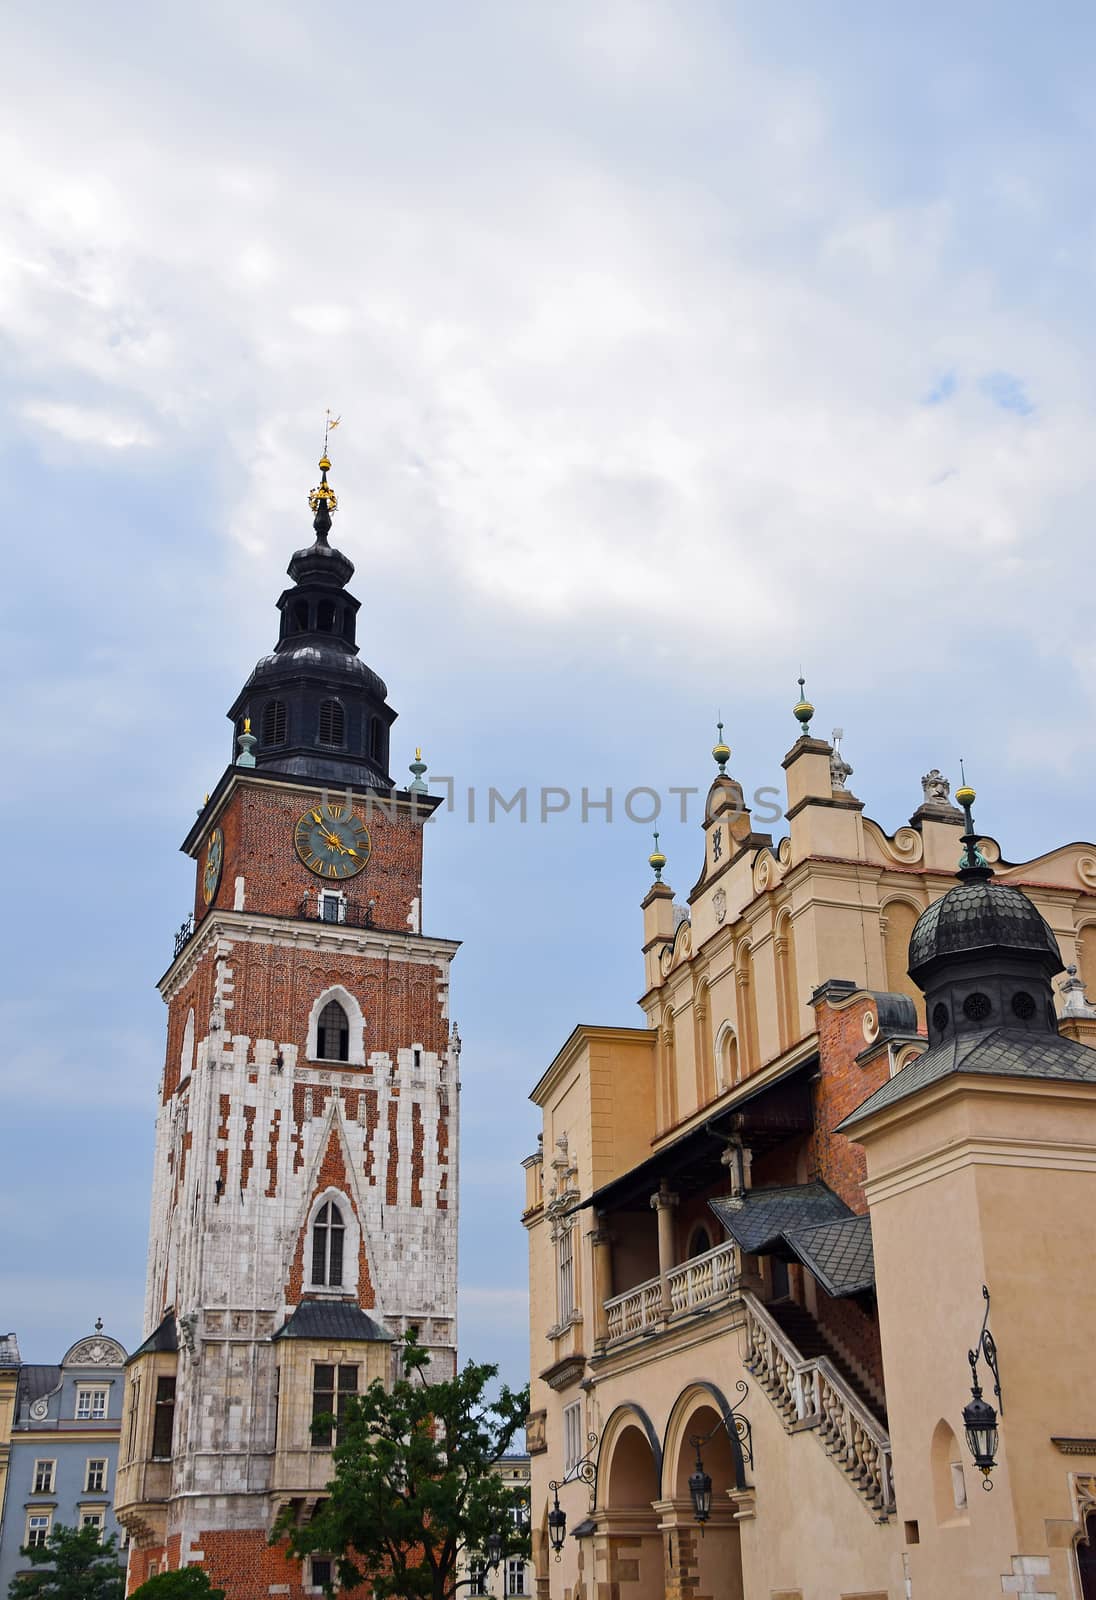 Town Hall tower and Cloth Hall in Krakow, Poland by BreakingTheWalls